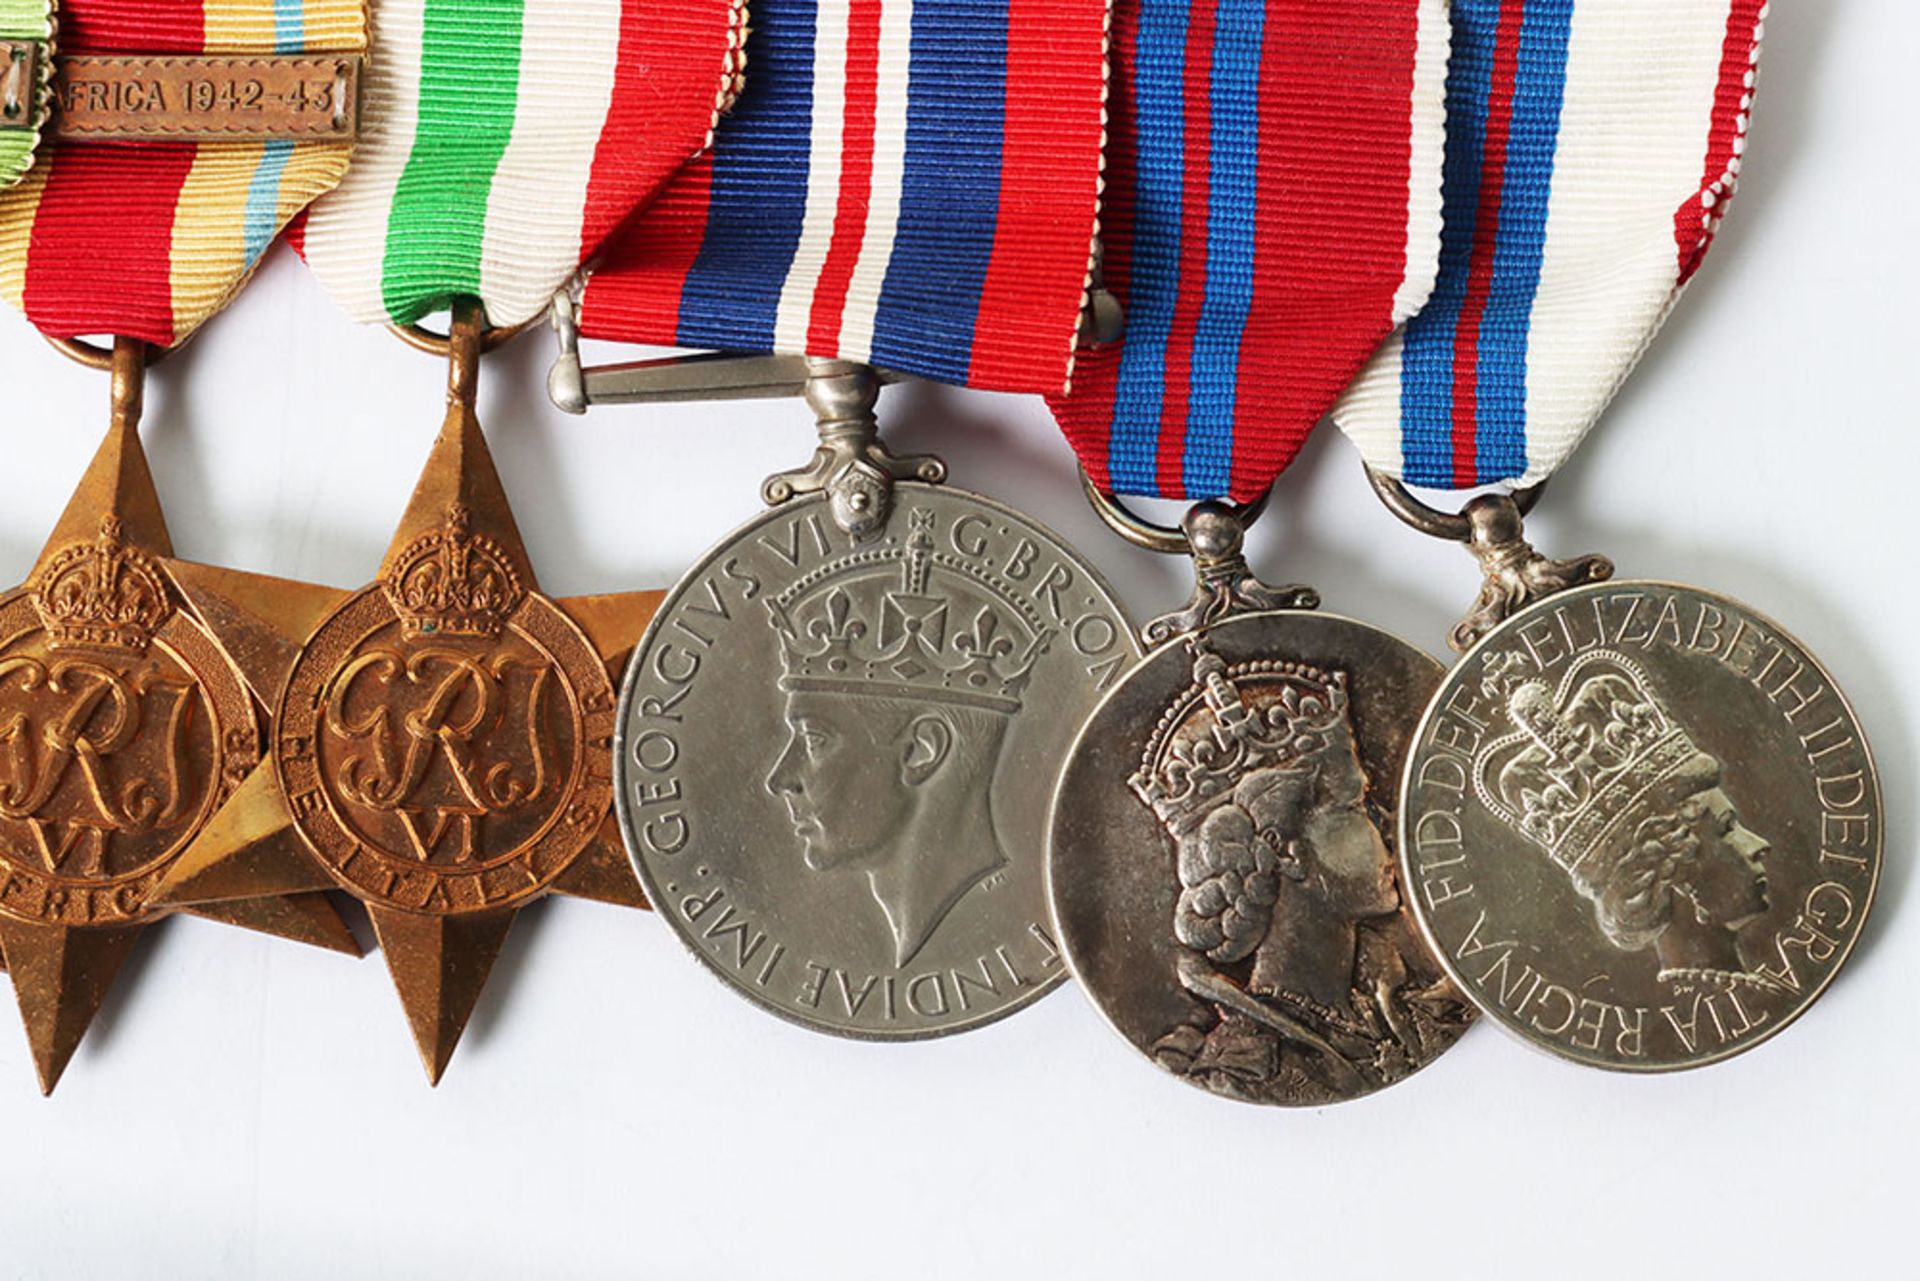 An Impressive Second World War Malta Siege George Cross Recipients Copy Medal Group for Wearing of L - Image 3 of 8